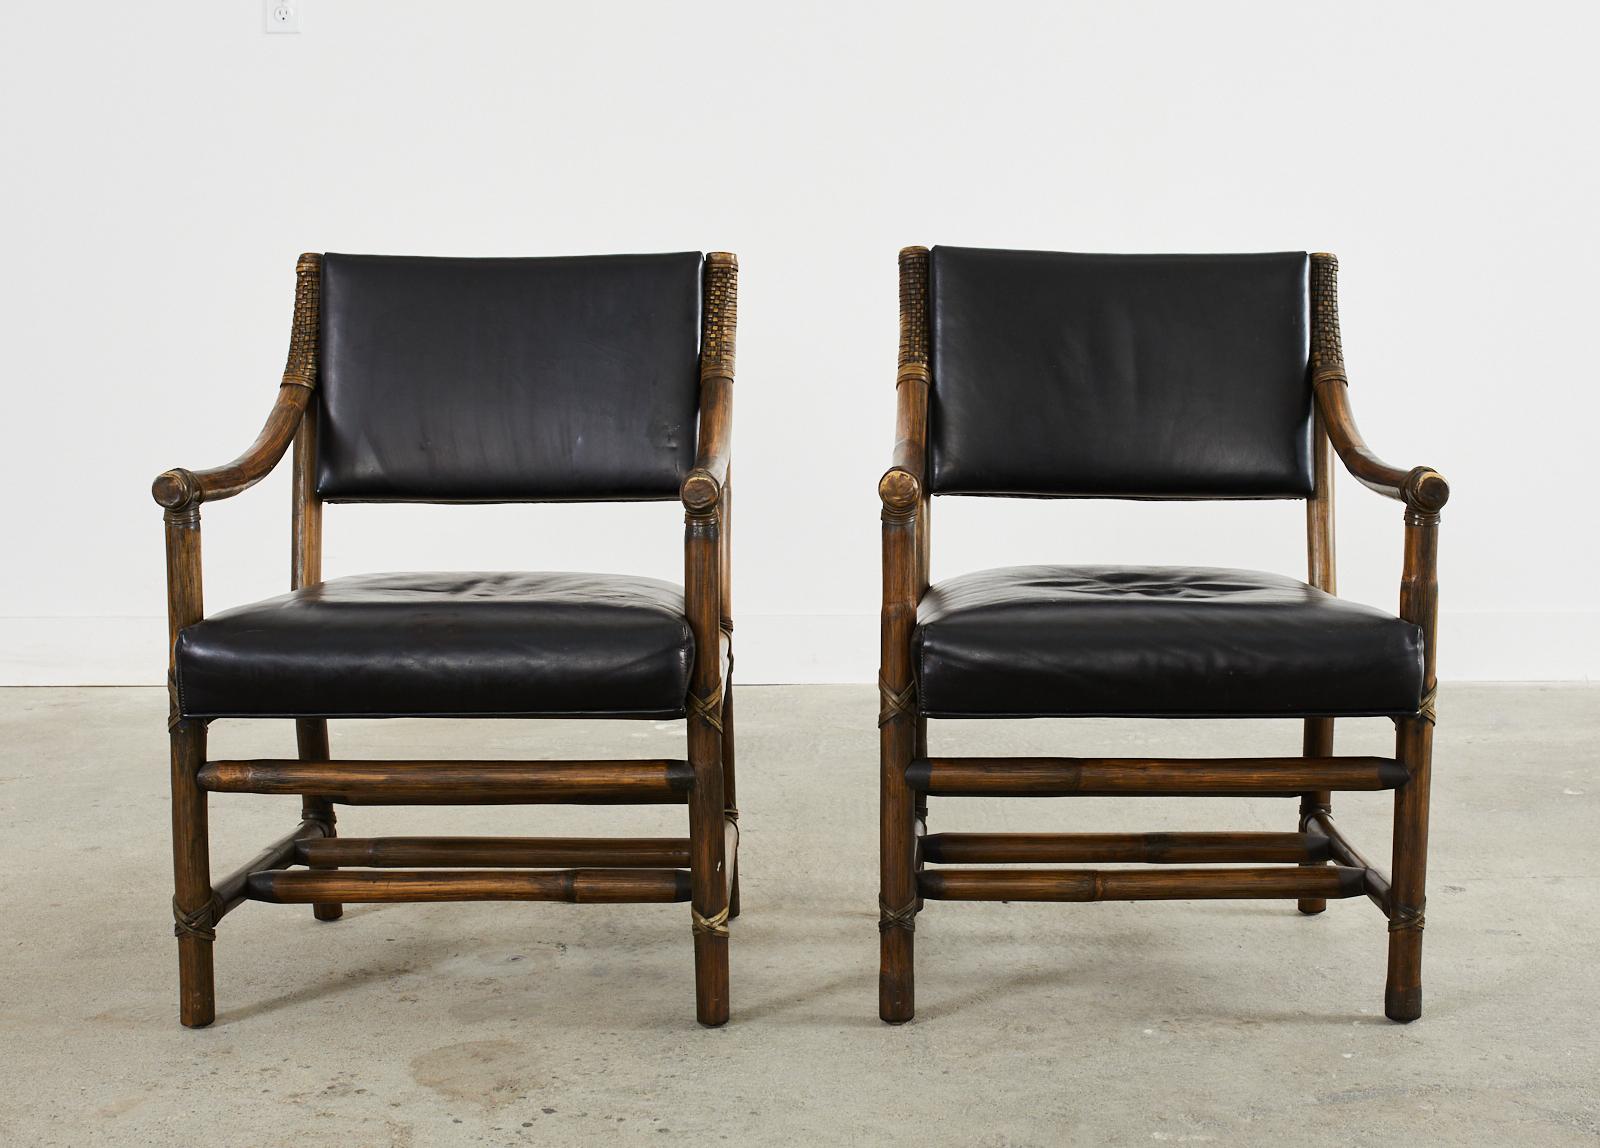 Mid-century organic modern pair of library armchairs or dining chairs made by McGuire. The chairs feature a rattan pole frame lashed together with leather rawhide laces. The chairs have gracefully curved arms and thick black leather covered seats.